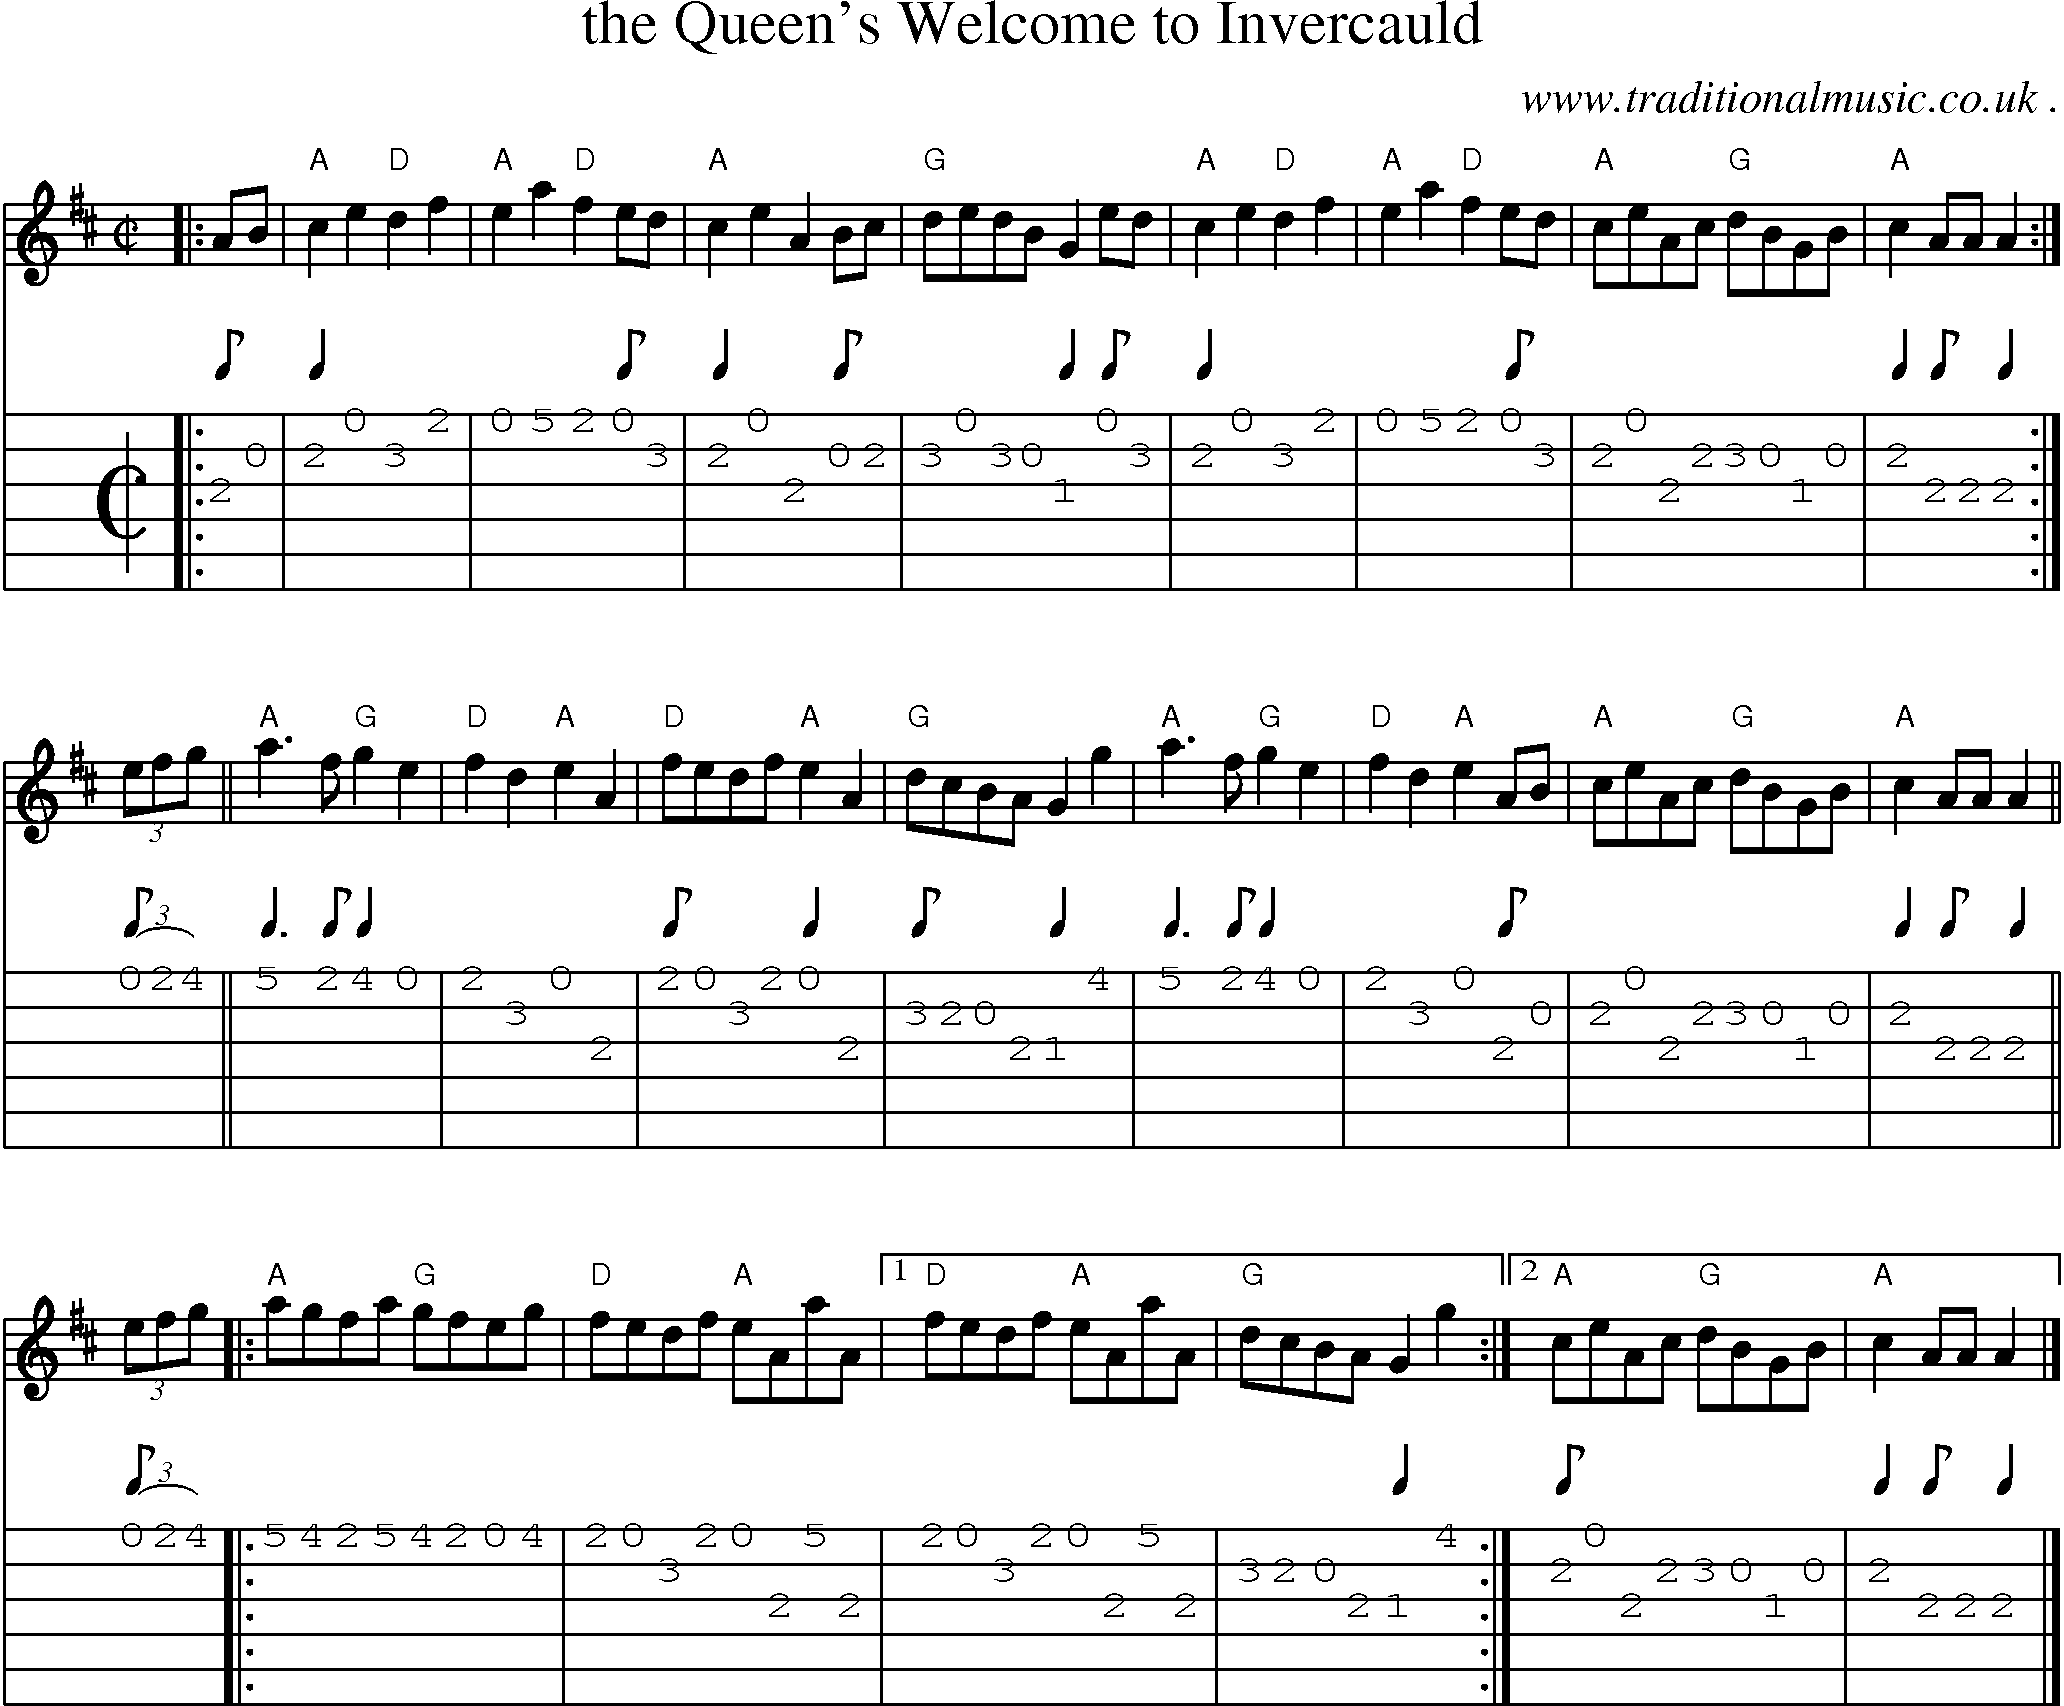 Sheet-music  score, Chords and Guitar Tabs for The Queens Welcome To Invercauld